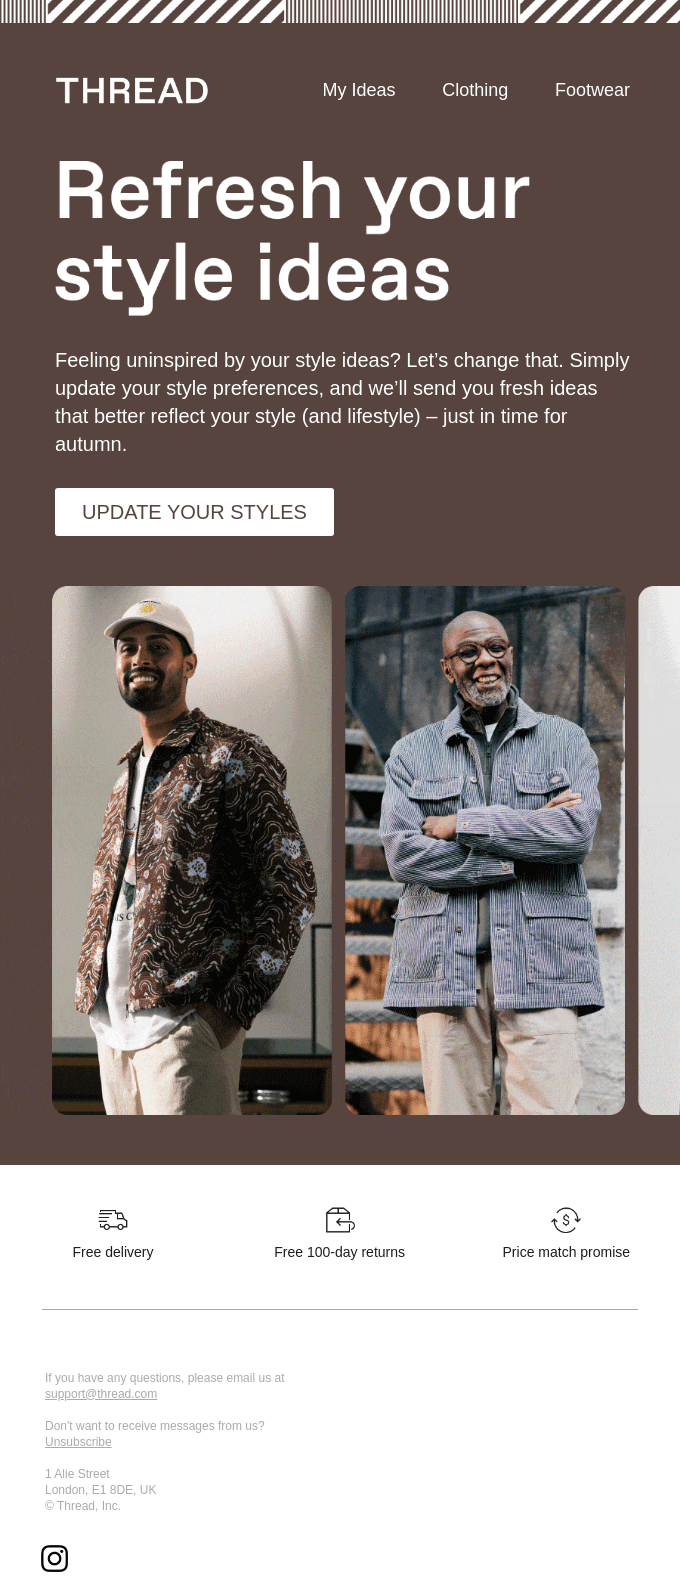 Smiles Davis, has your style changed?